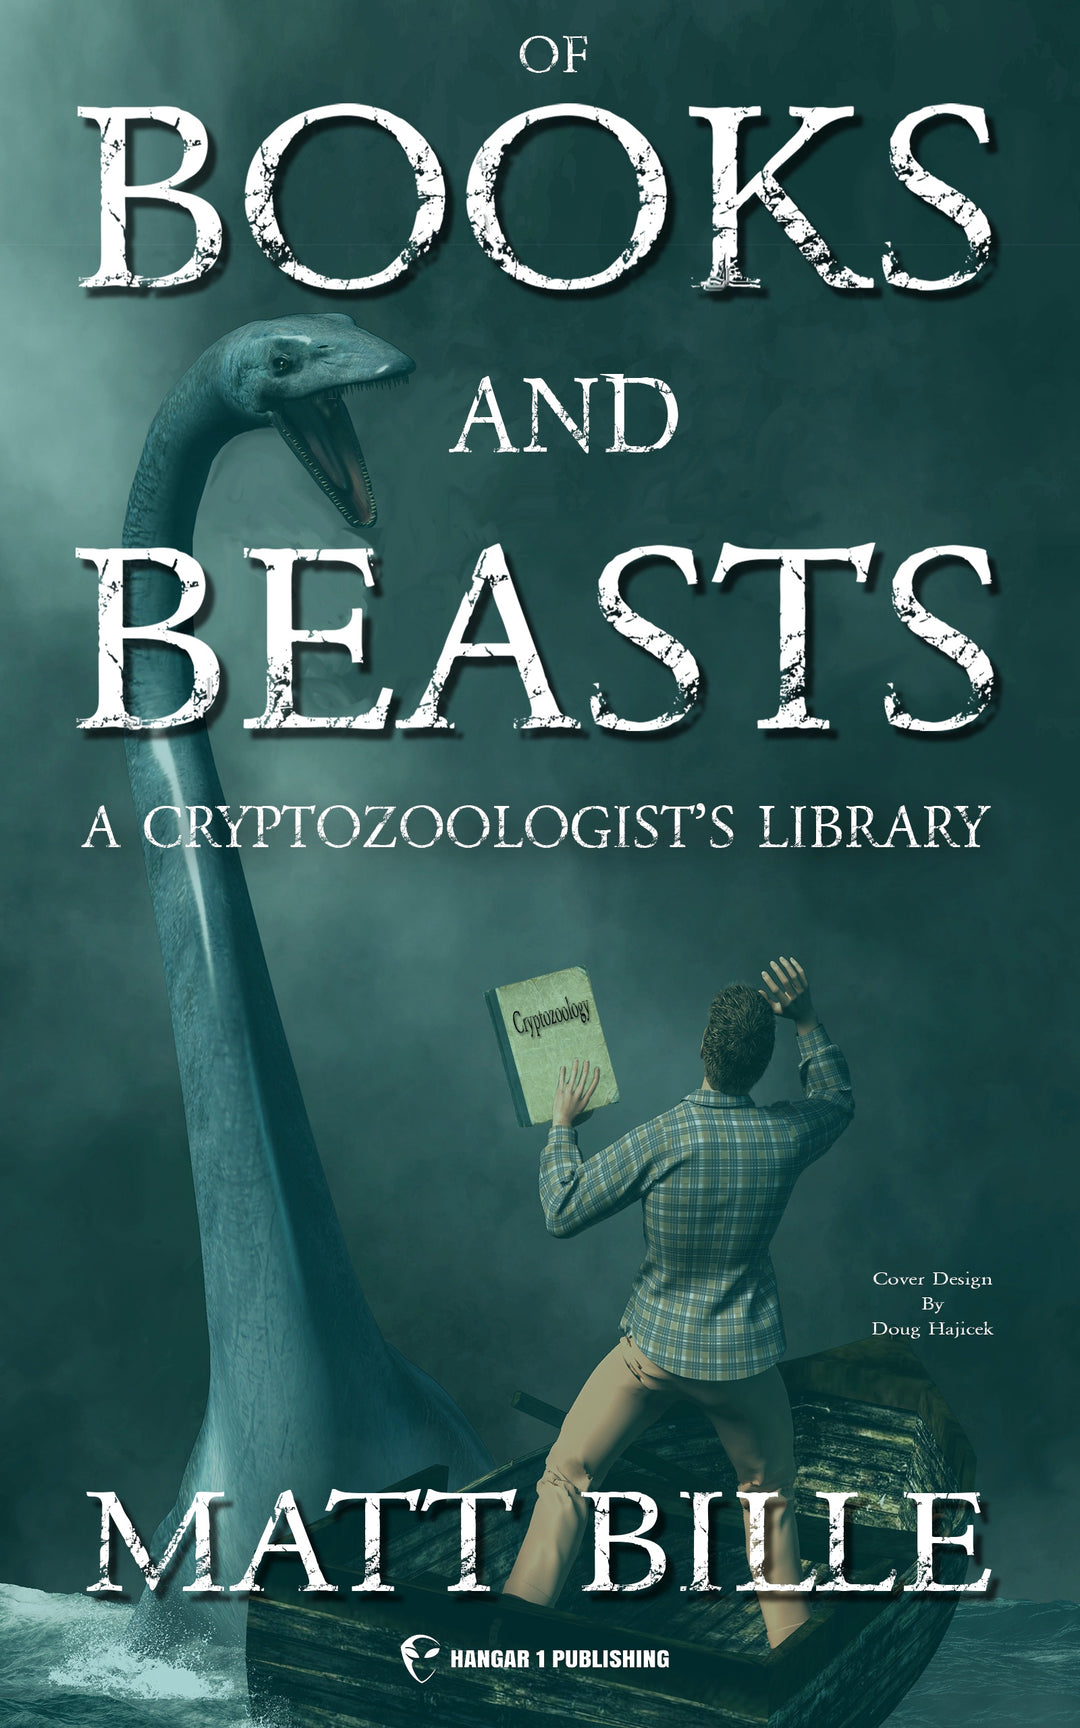 Of Books and Beasts: A Cryptozoologist's Library